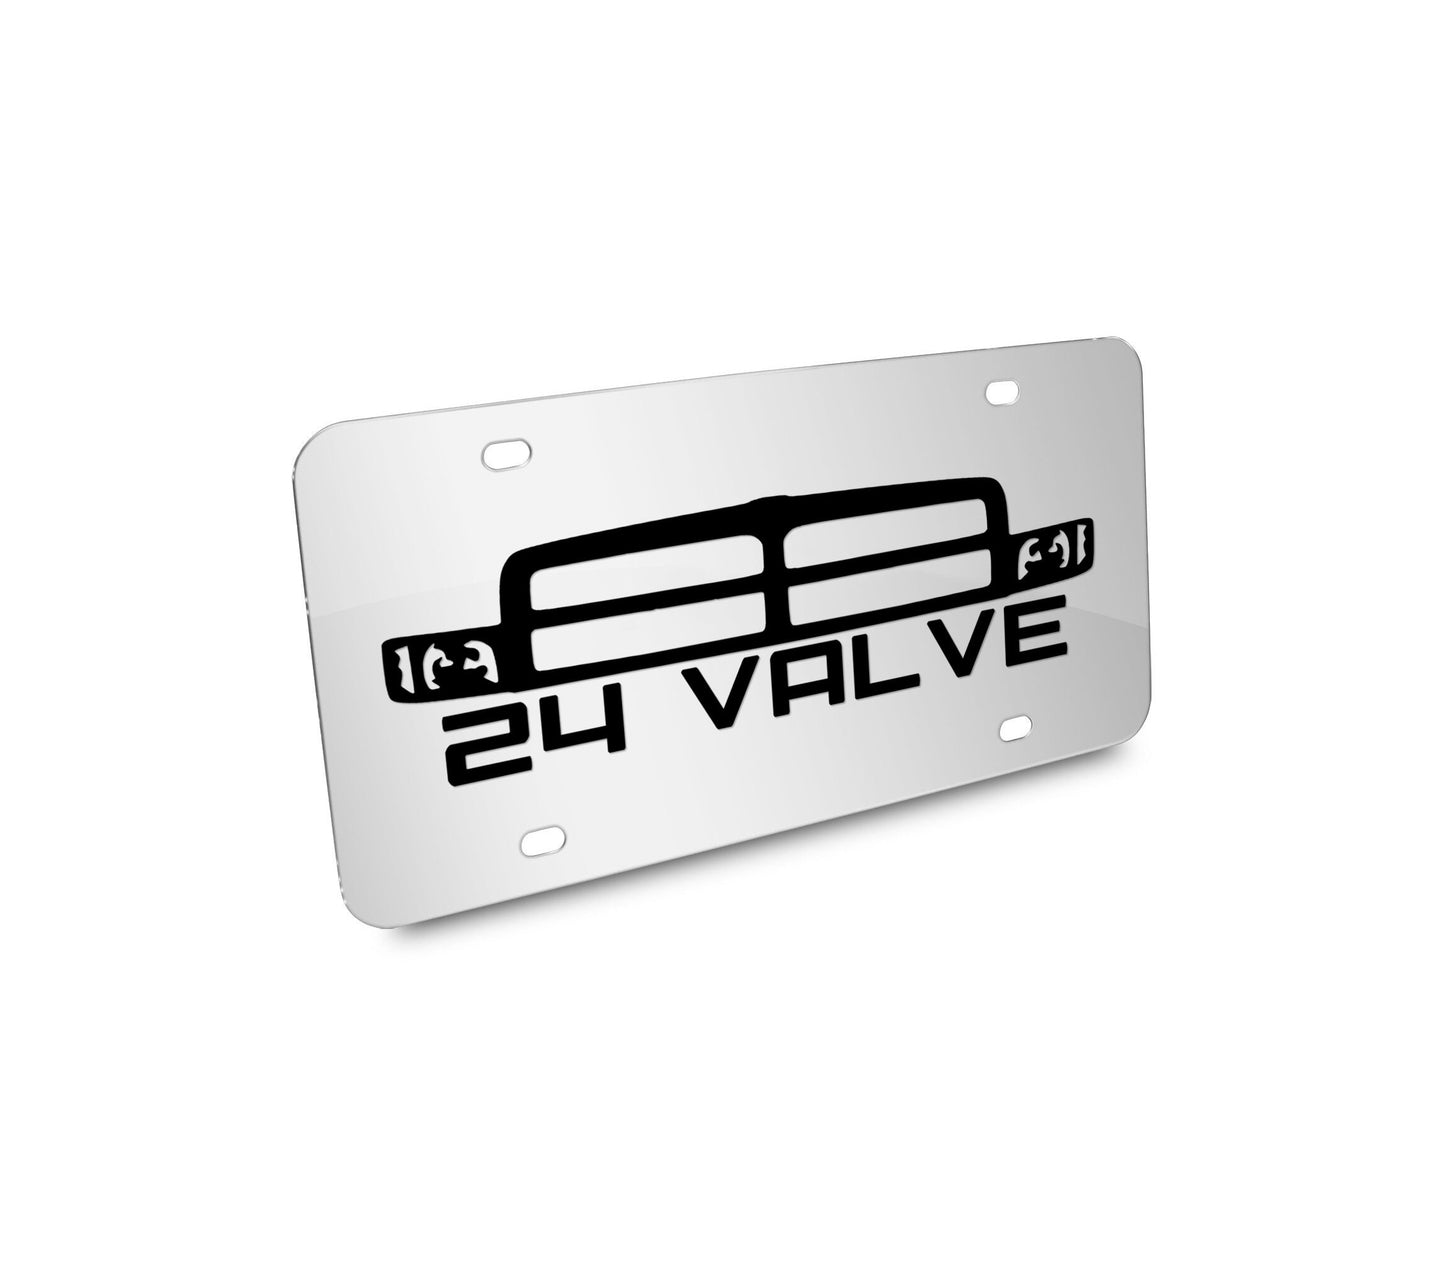 24 Valve 2nd Gen Grille License Plate - Many Colors